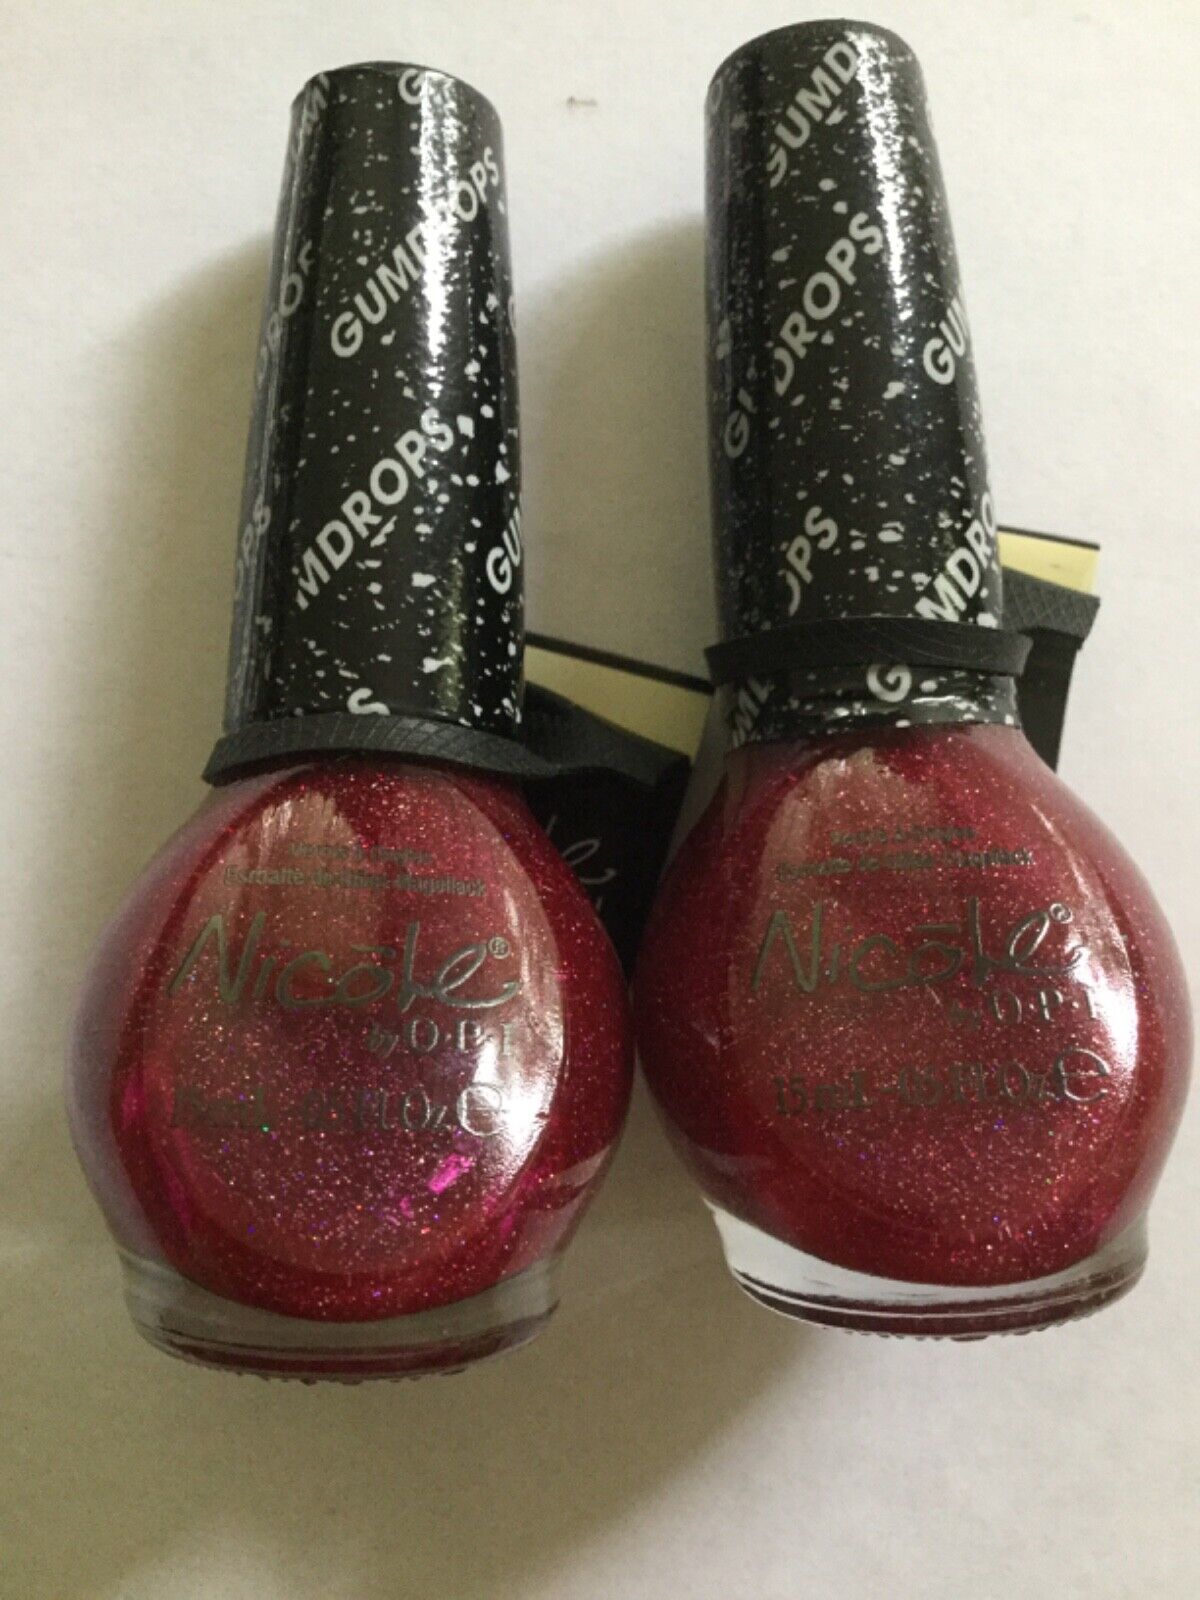 Nicole by OPI 0.5 oz Full Size - Lot of 2 Bottles - My Cherry Amour